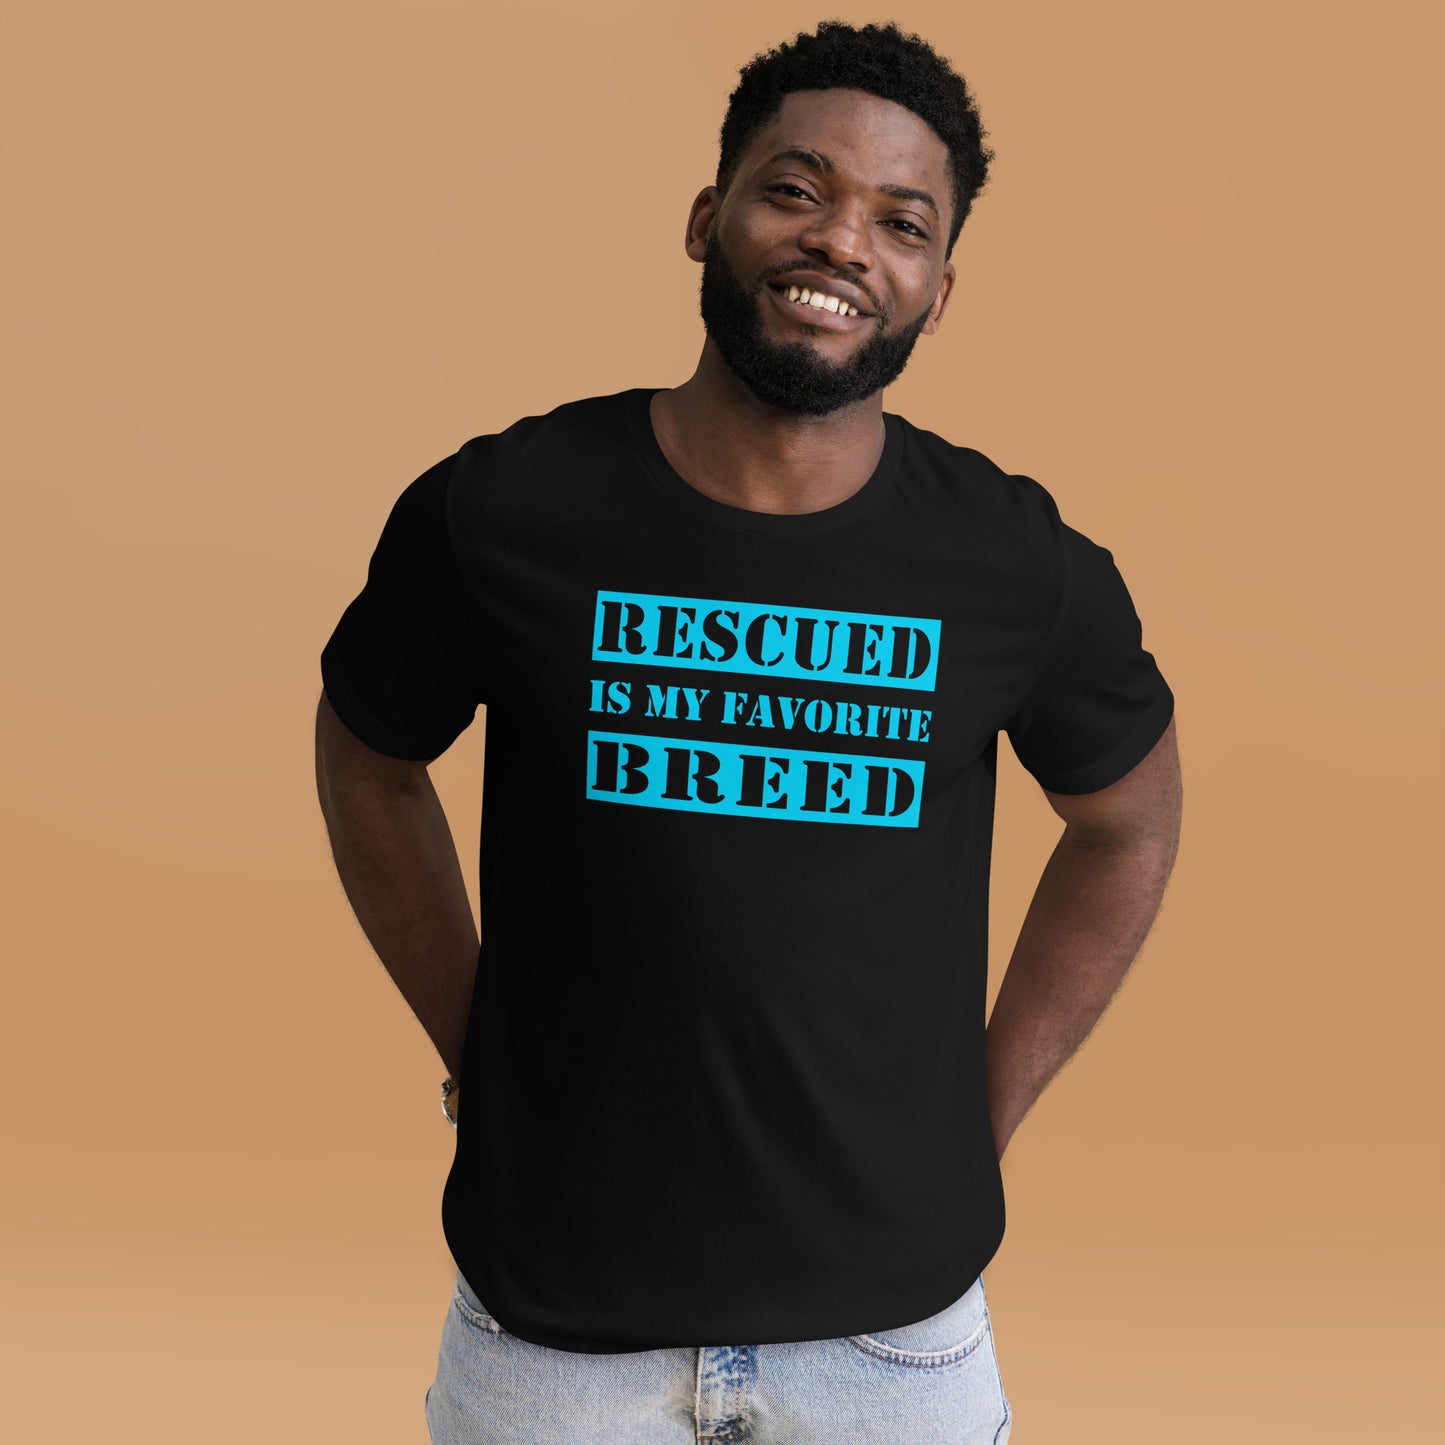 Rescued Is My Favorite Breed Unisex Black T-Shirt Designed by Dog Artistry.